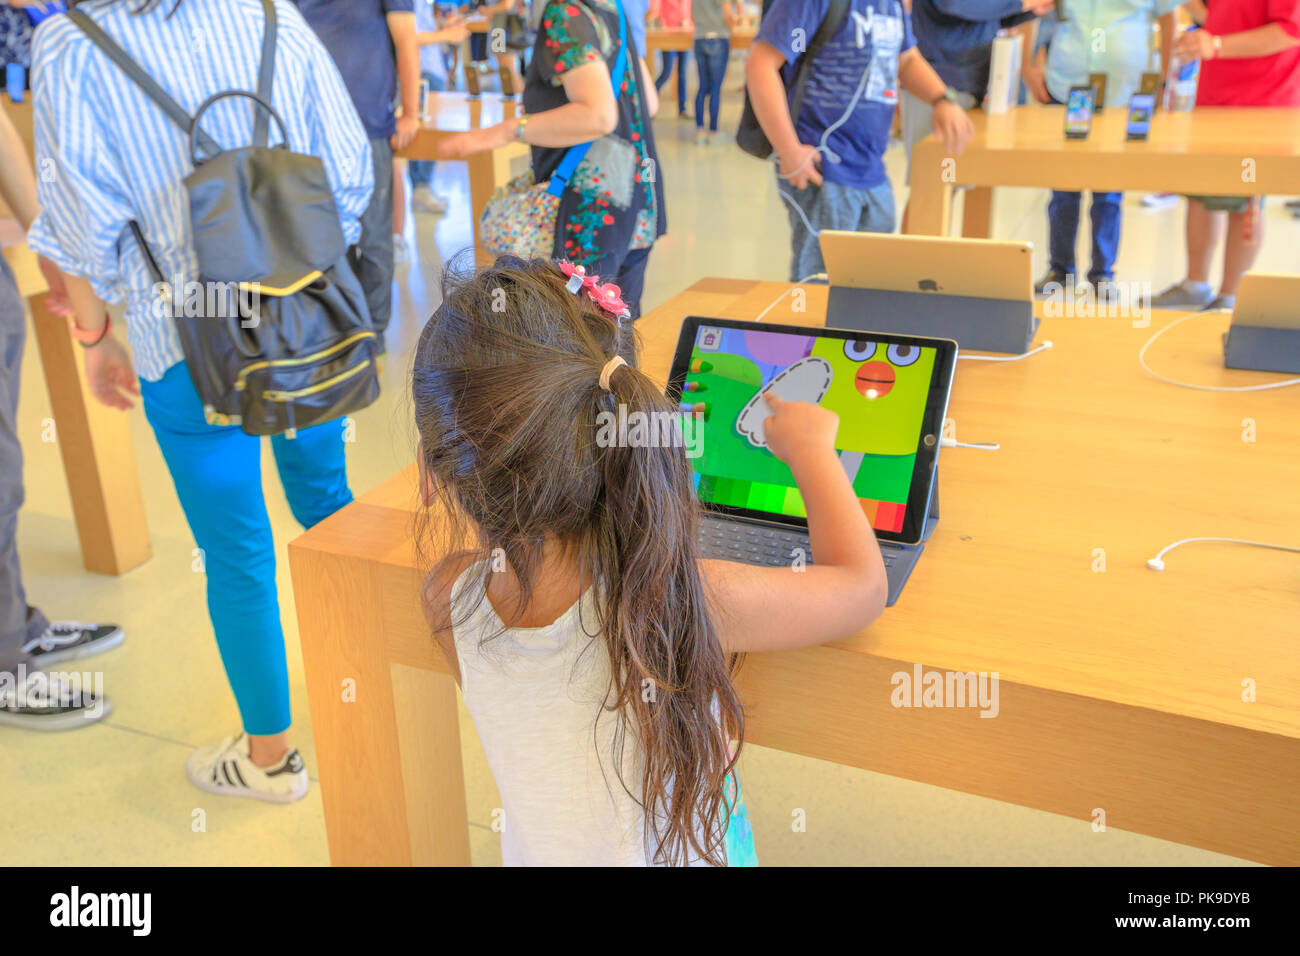 Cupertino,CA,United States - August 12, 2018: Child playing a kids app on Ipad in the new Apple store and Headquarters of Apple Park Visitor Center, Tantau Avenue, Cupertino, Silicon Valley,California Stock Photo